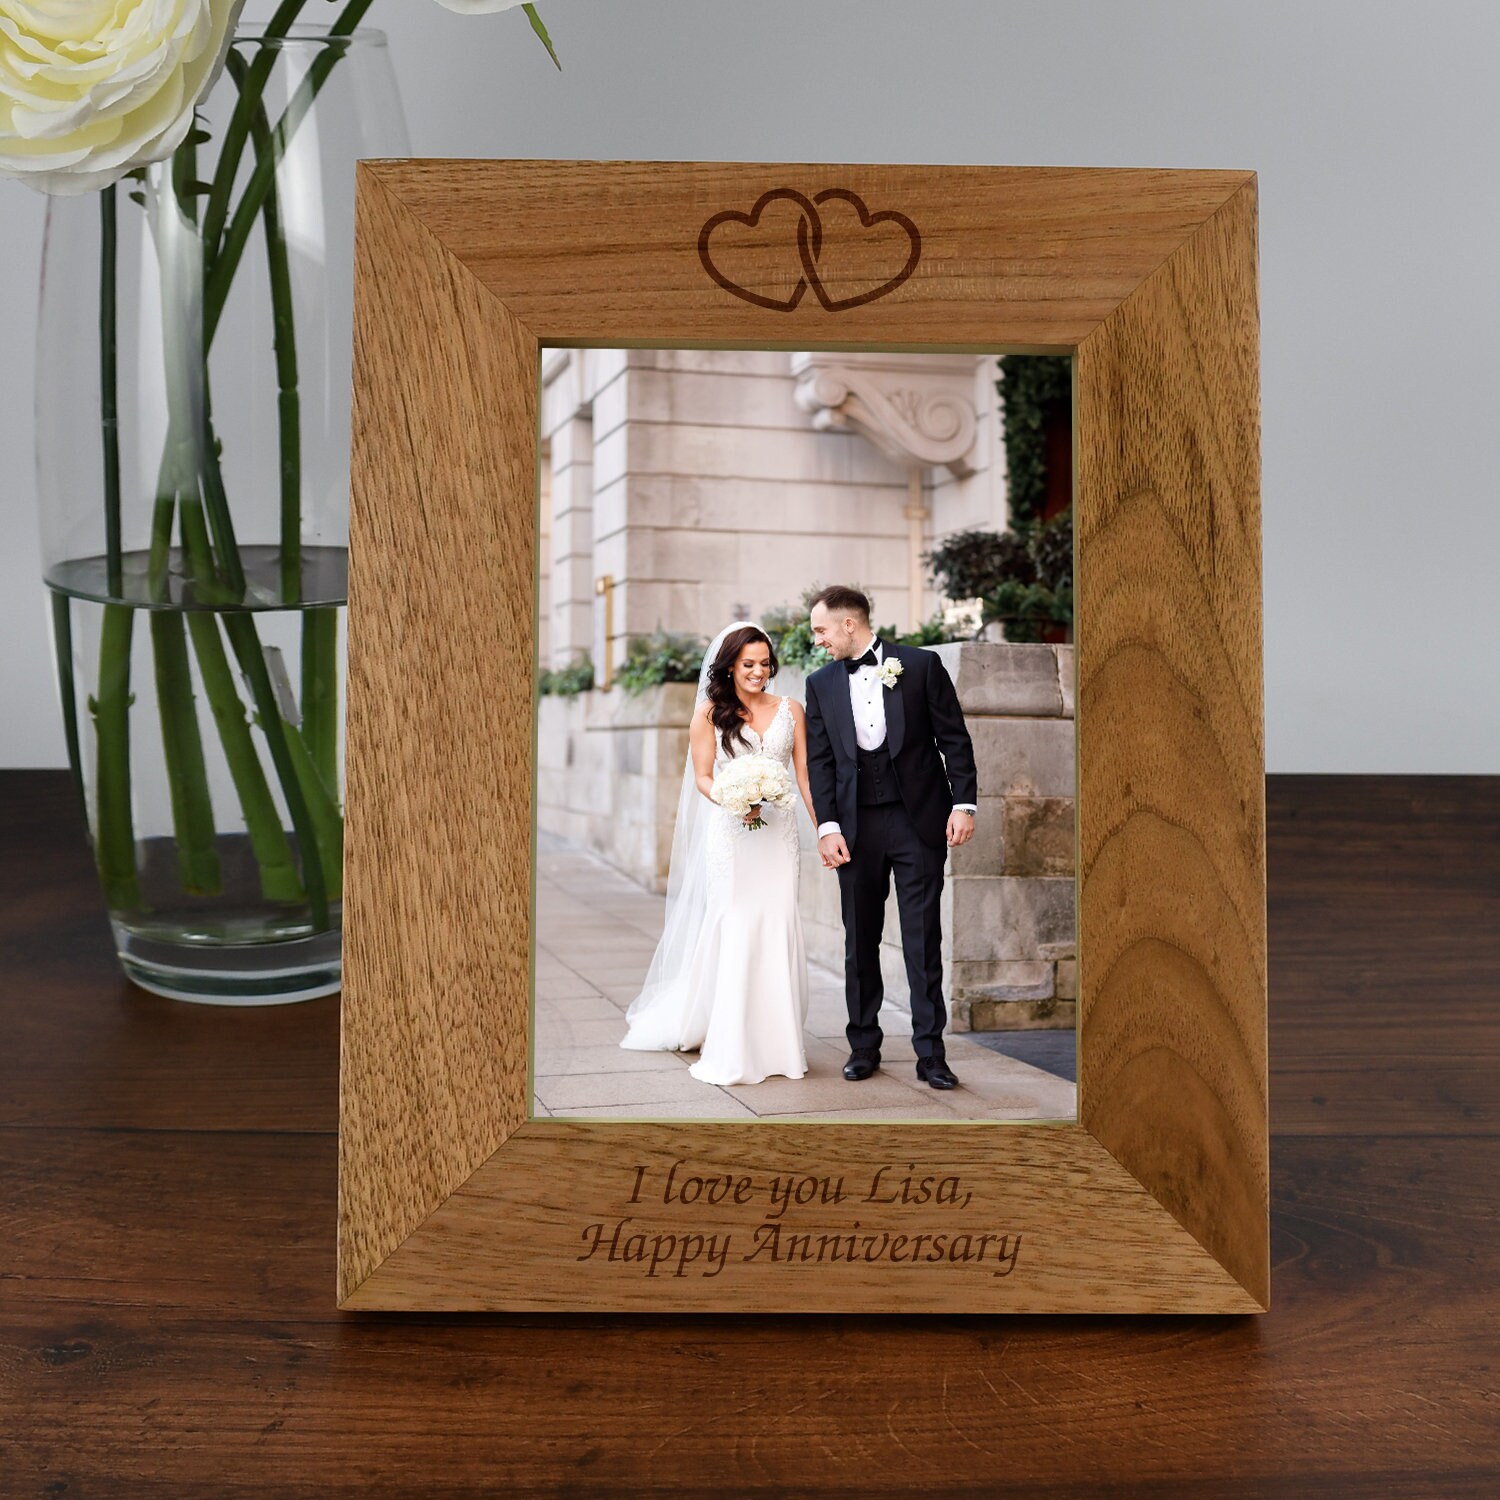  16x20 Signature Autograph Picture Matted Frame 8x10 Picture  Wood Glossy Traditional Mahogany Personalized Engraved Frames Weddings Baby  Retirement Reunions Photo Inner Gold - Single Frames